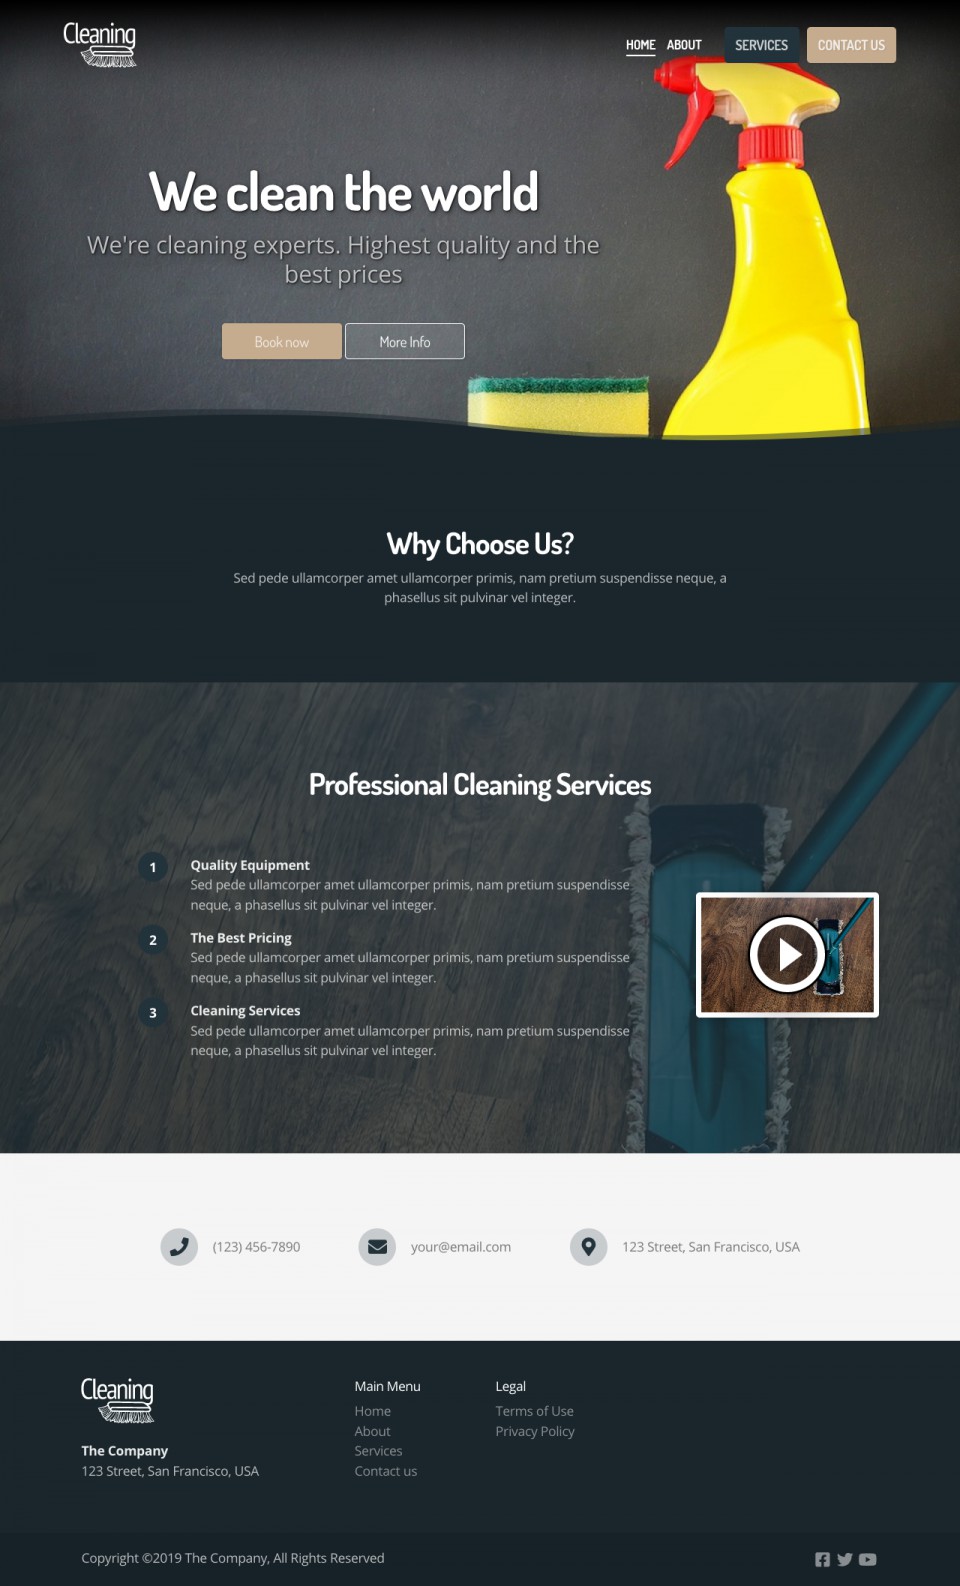 Cleaning Website Template - Ideal for small businesses, cleaning services, housework agencies, personal blogs, online stores, and more